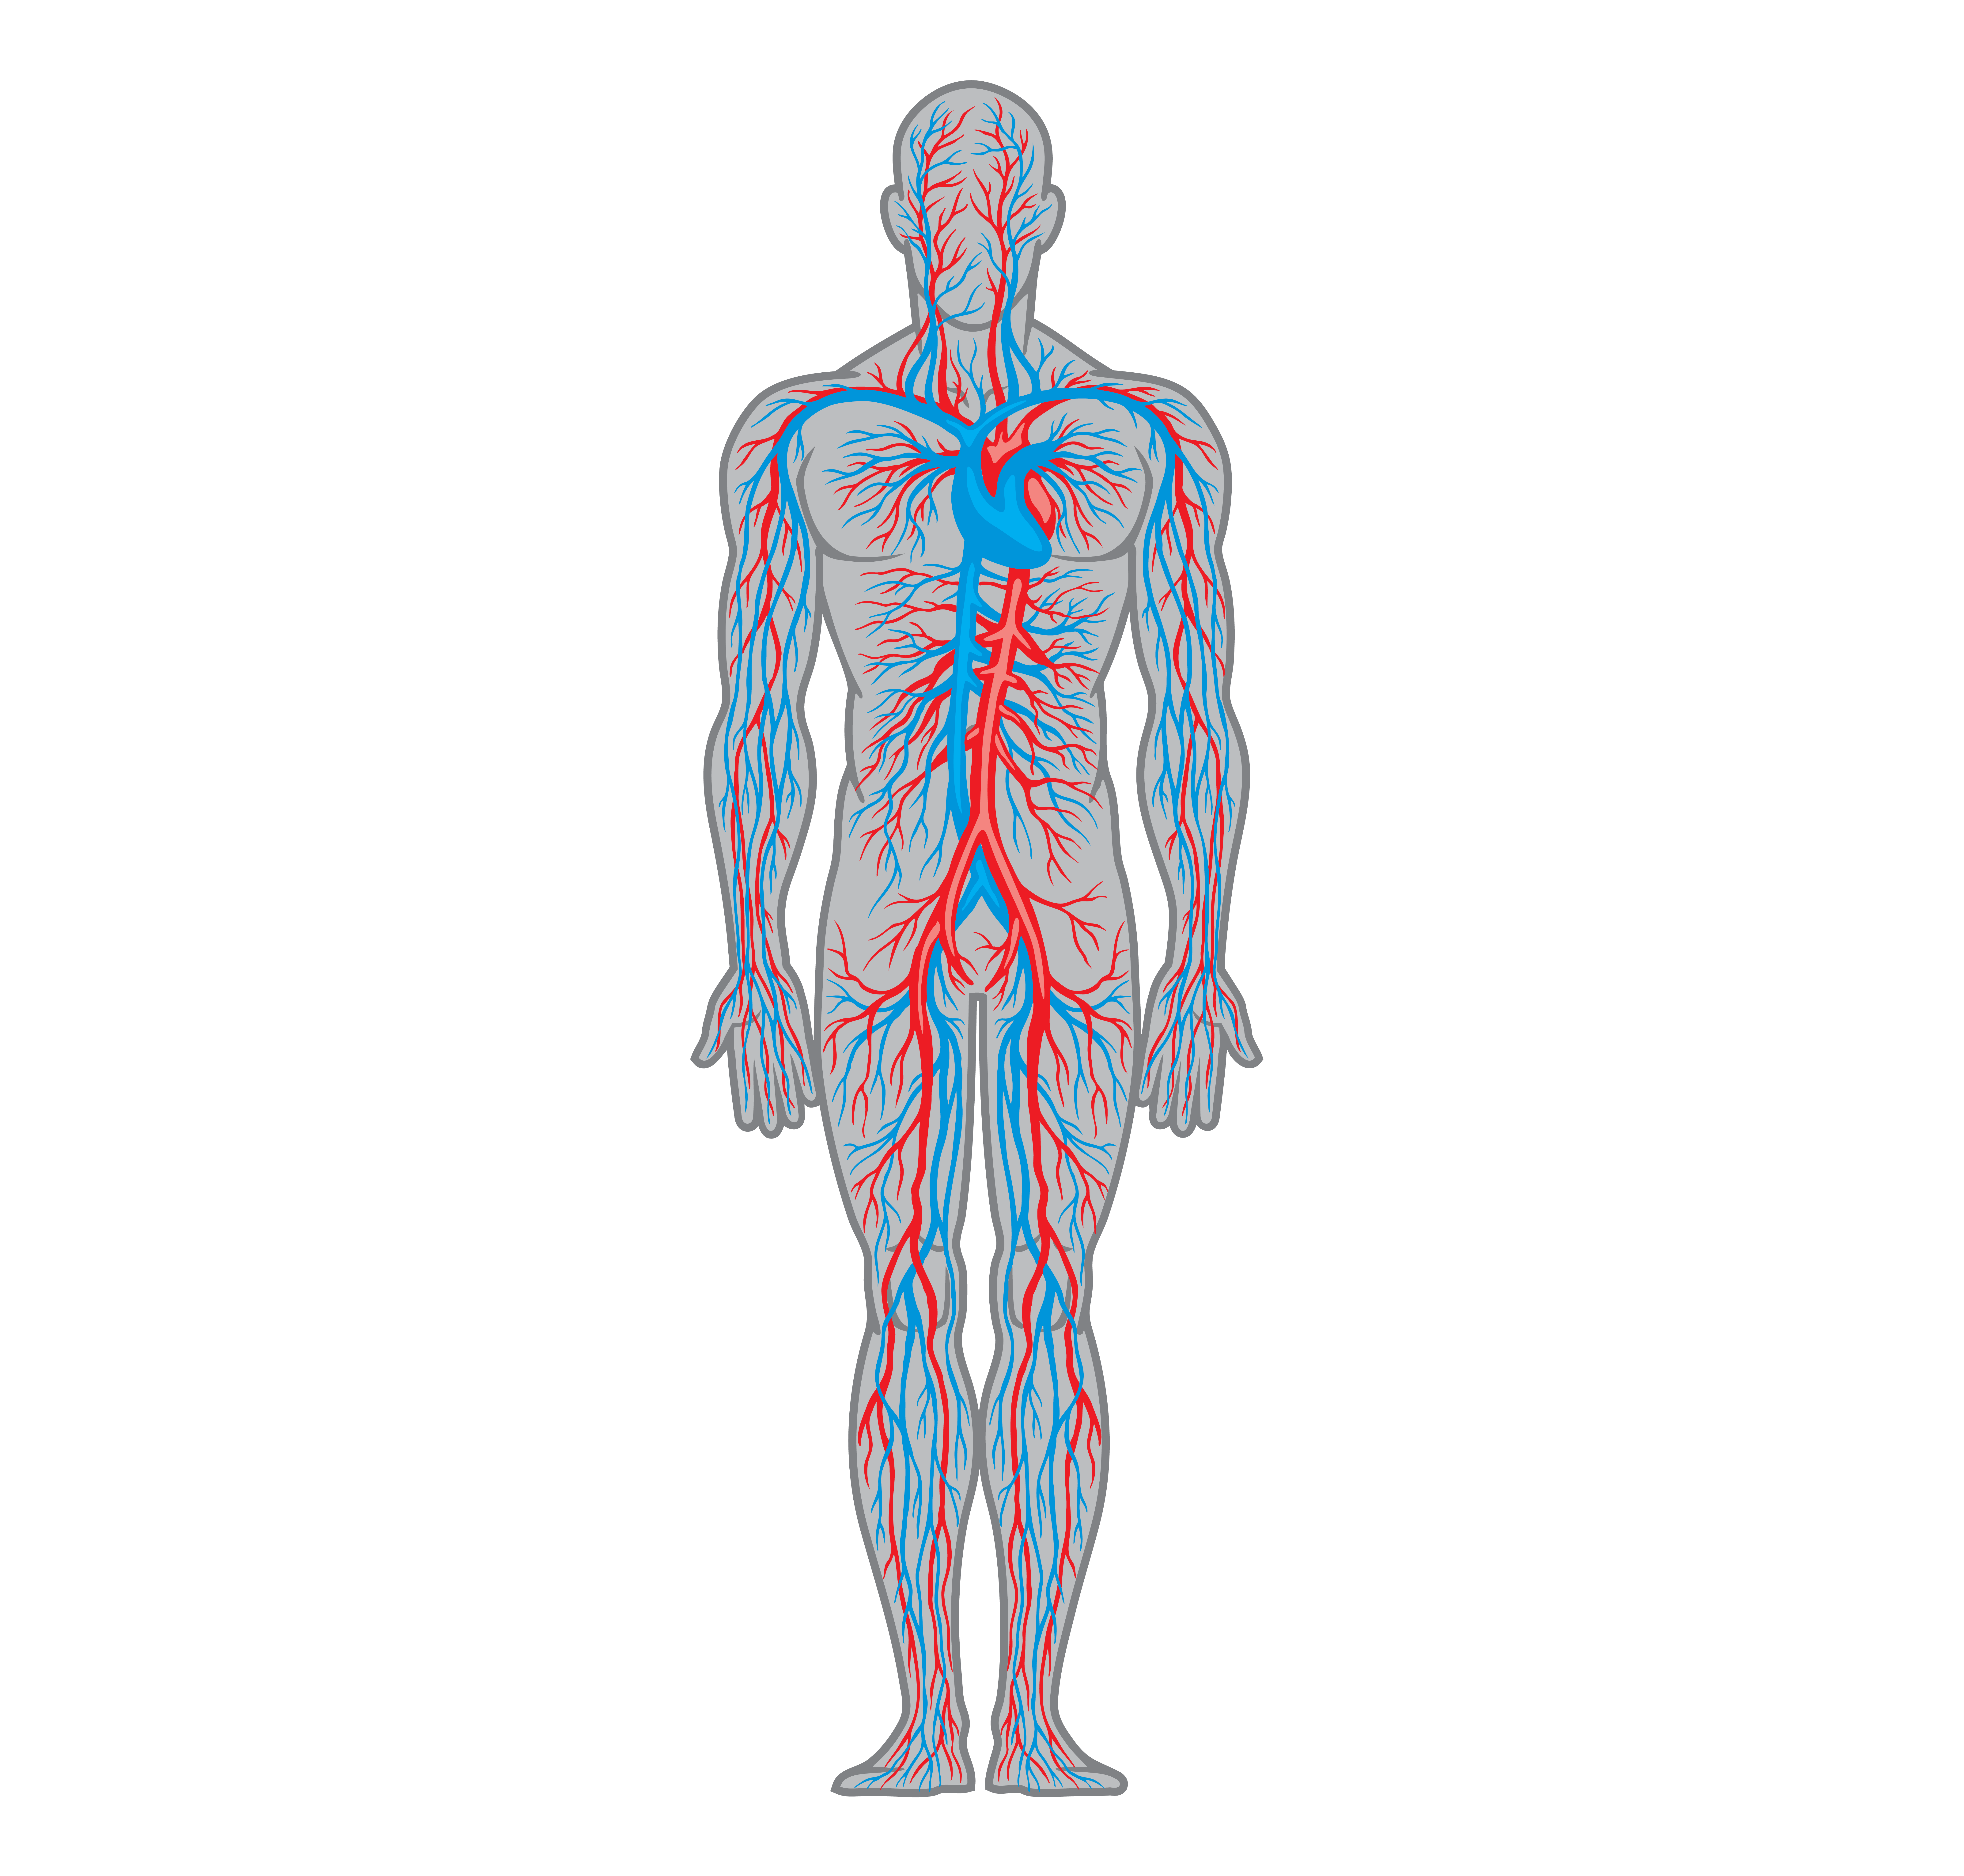 Illustration of human body with circulatory system highlighted